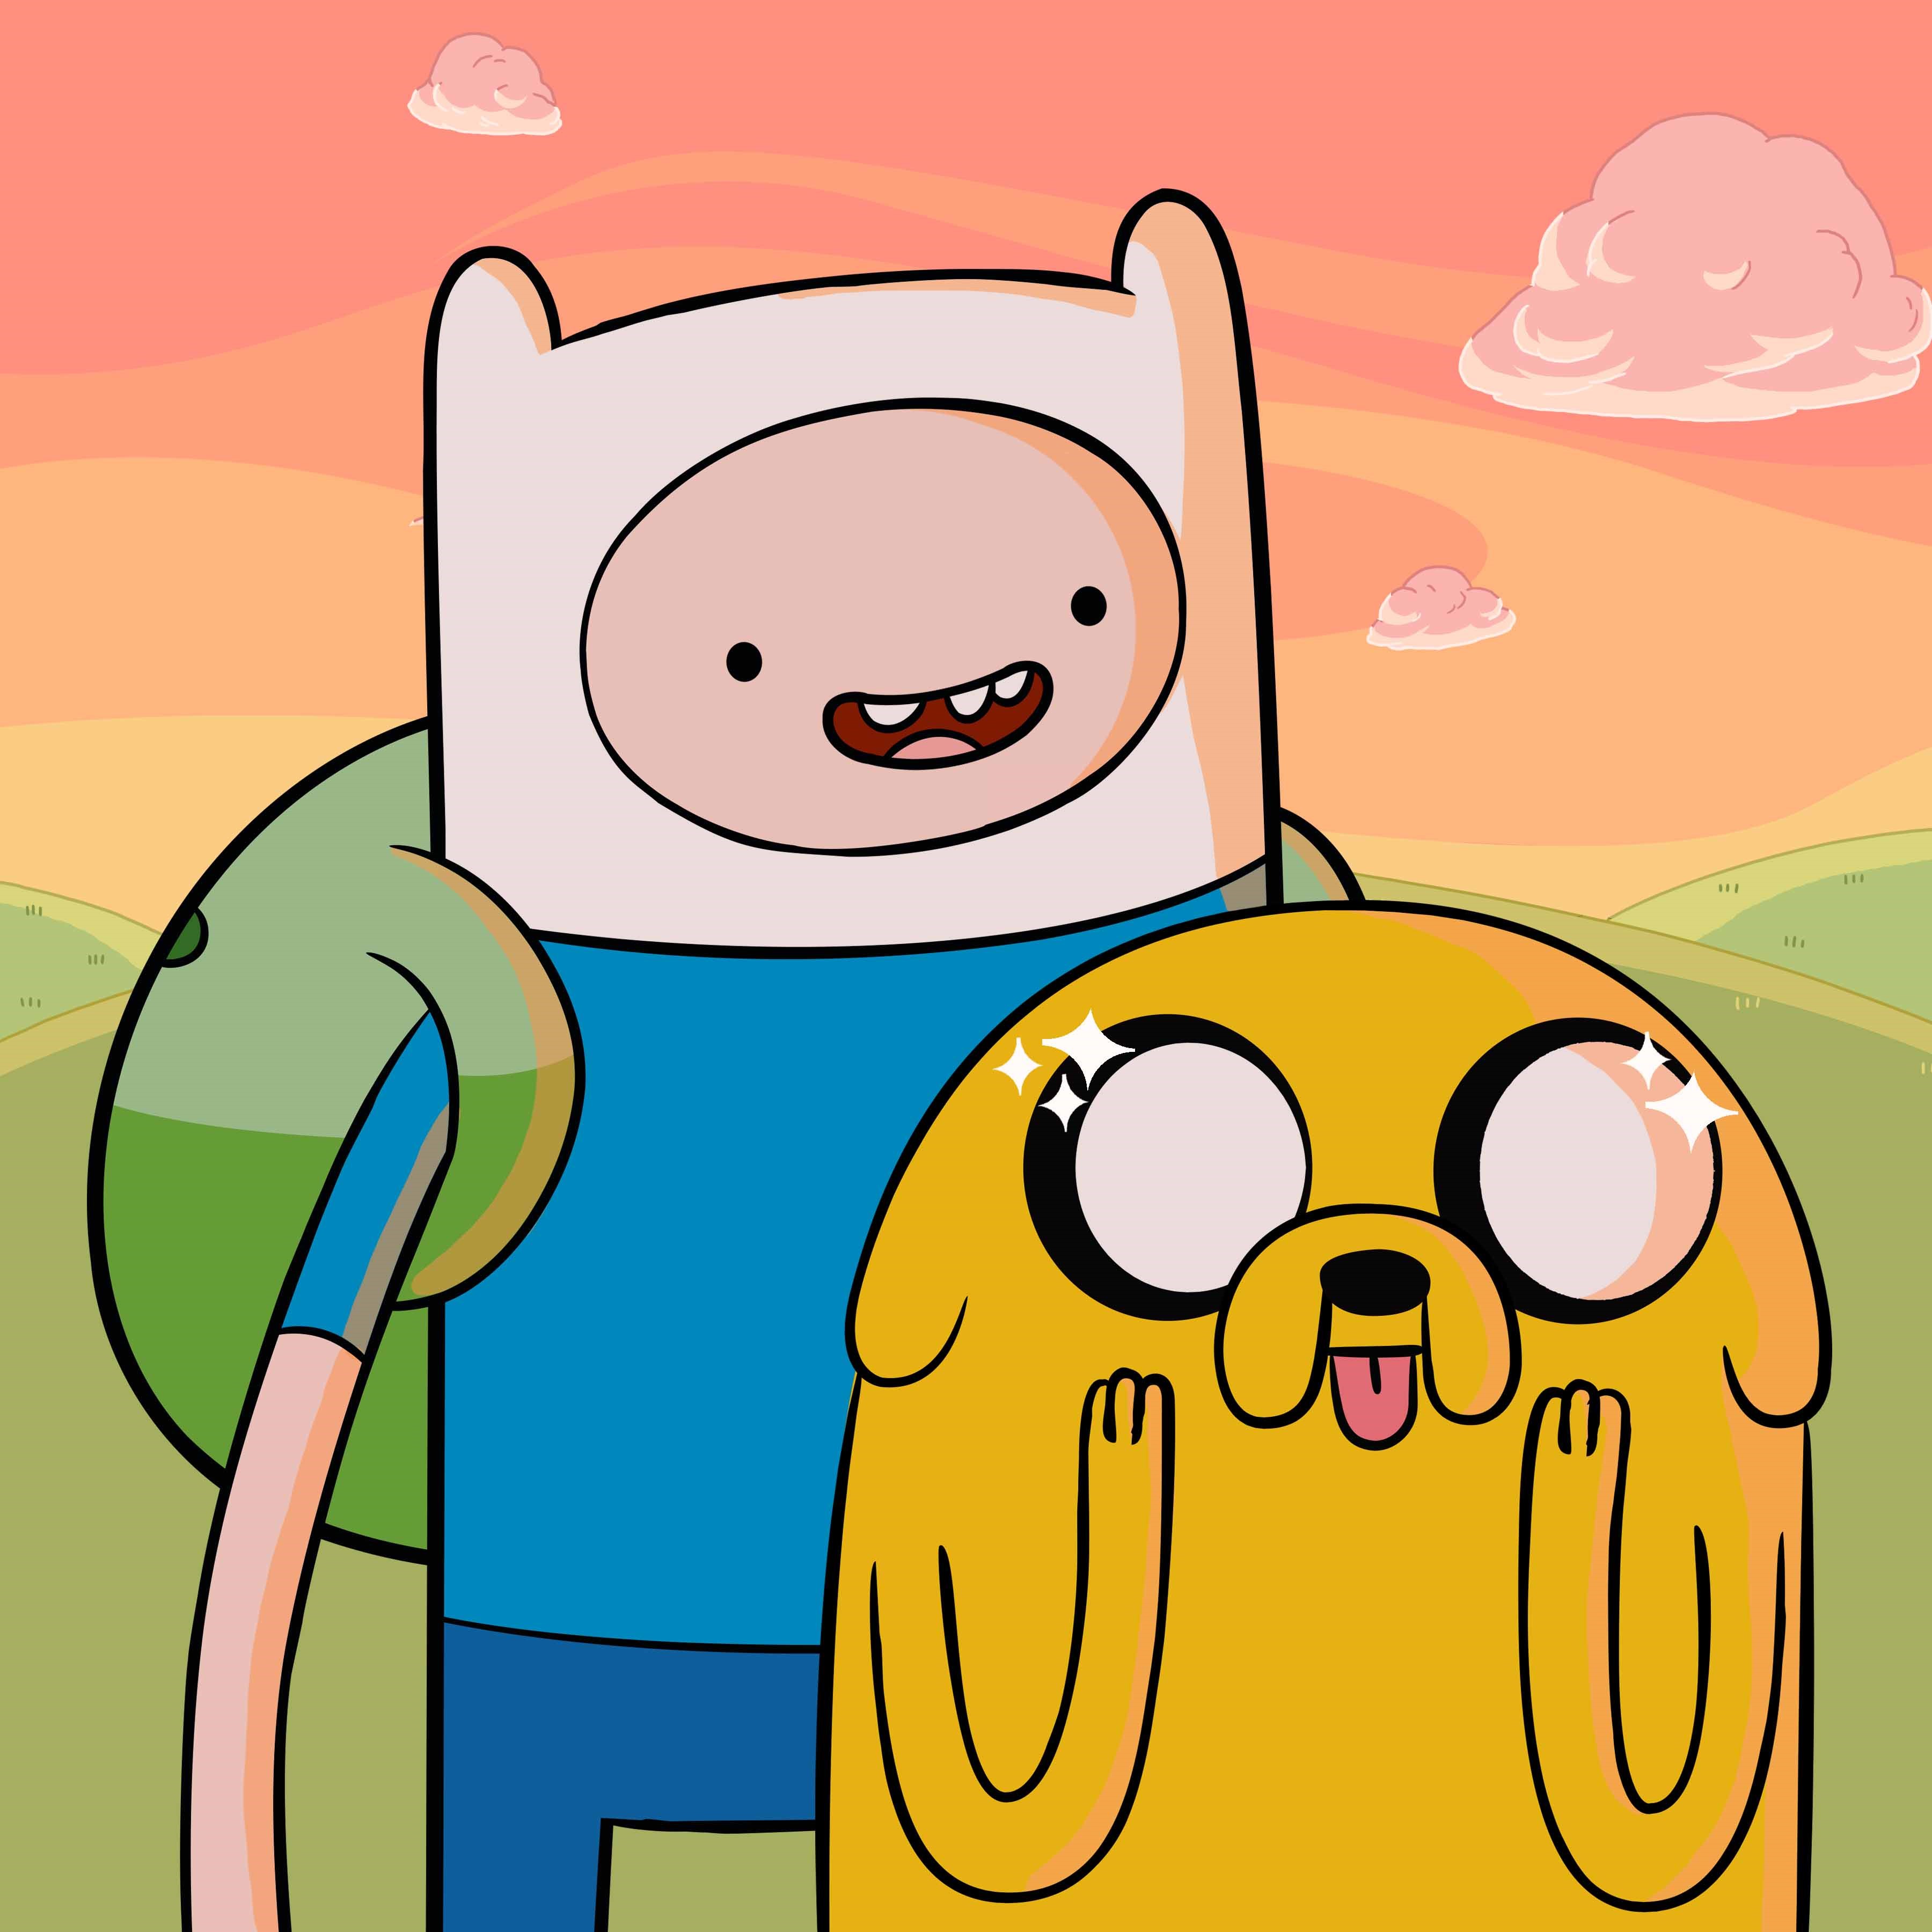 News Adventure Time 'Design a new character' contest ends Feb 17.